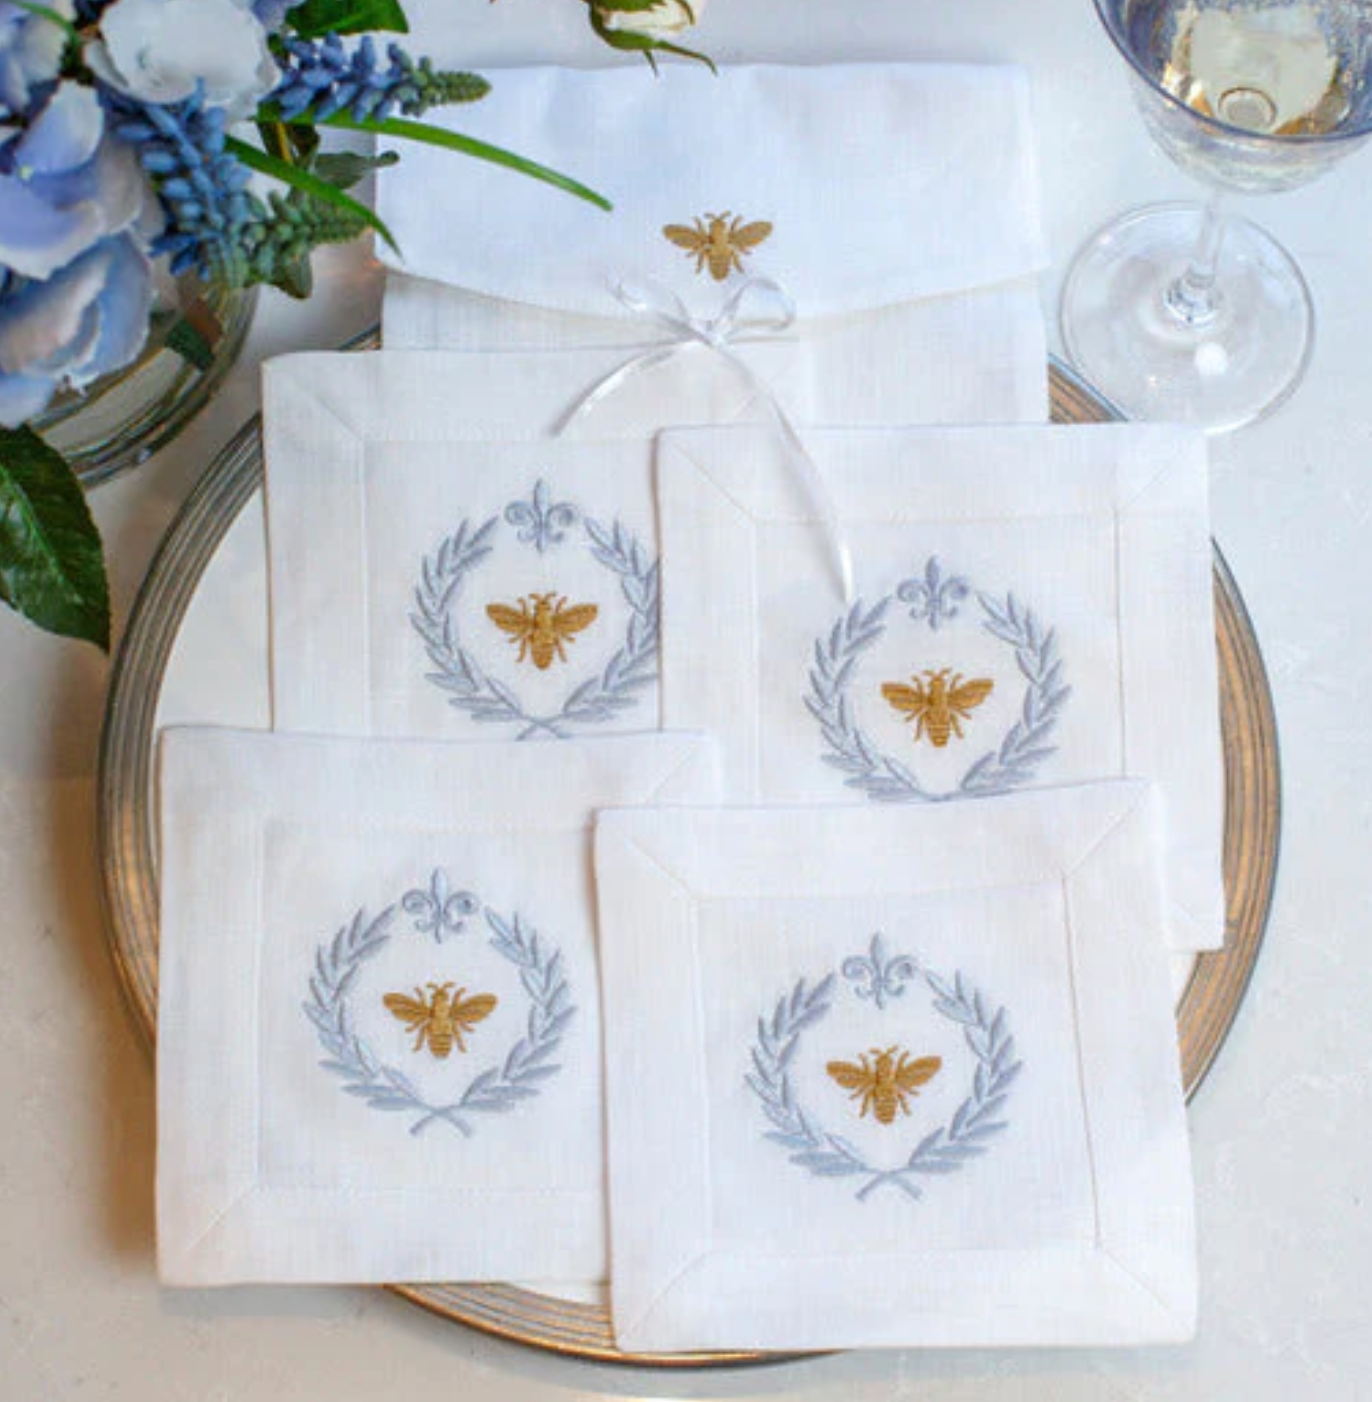 Bumble Bee Cocktail napkins